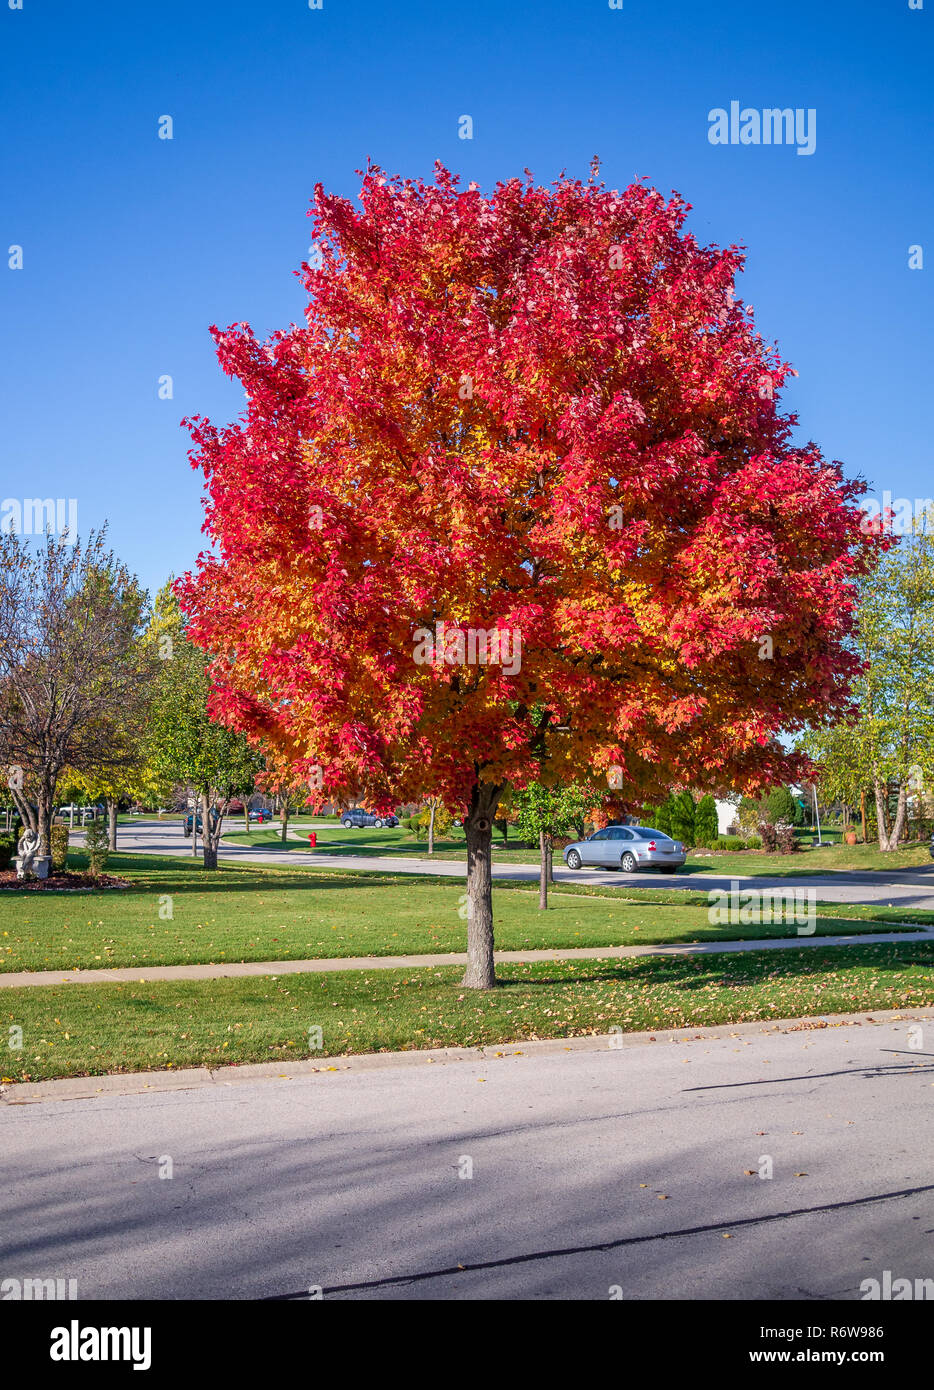 Autumn color in the midwest Stock Photo